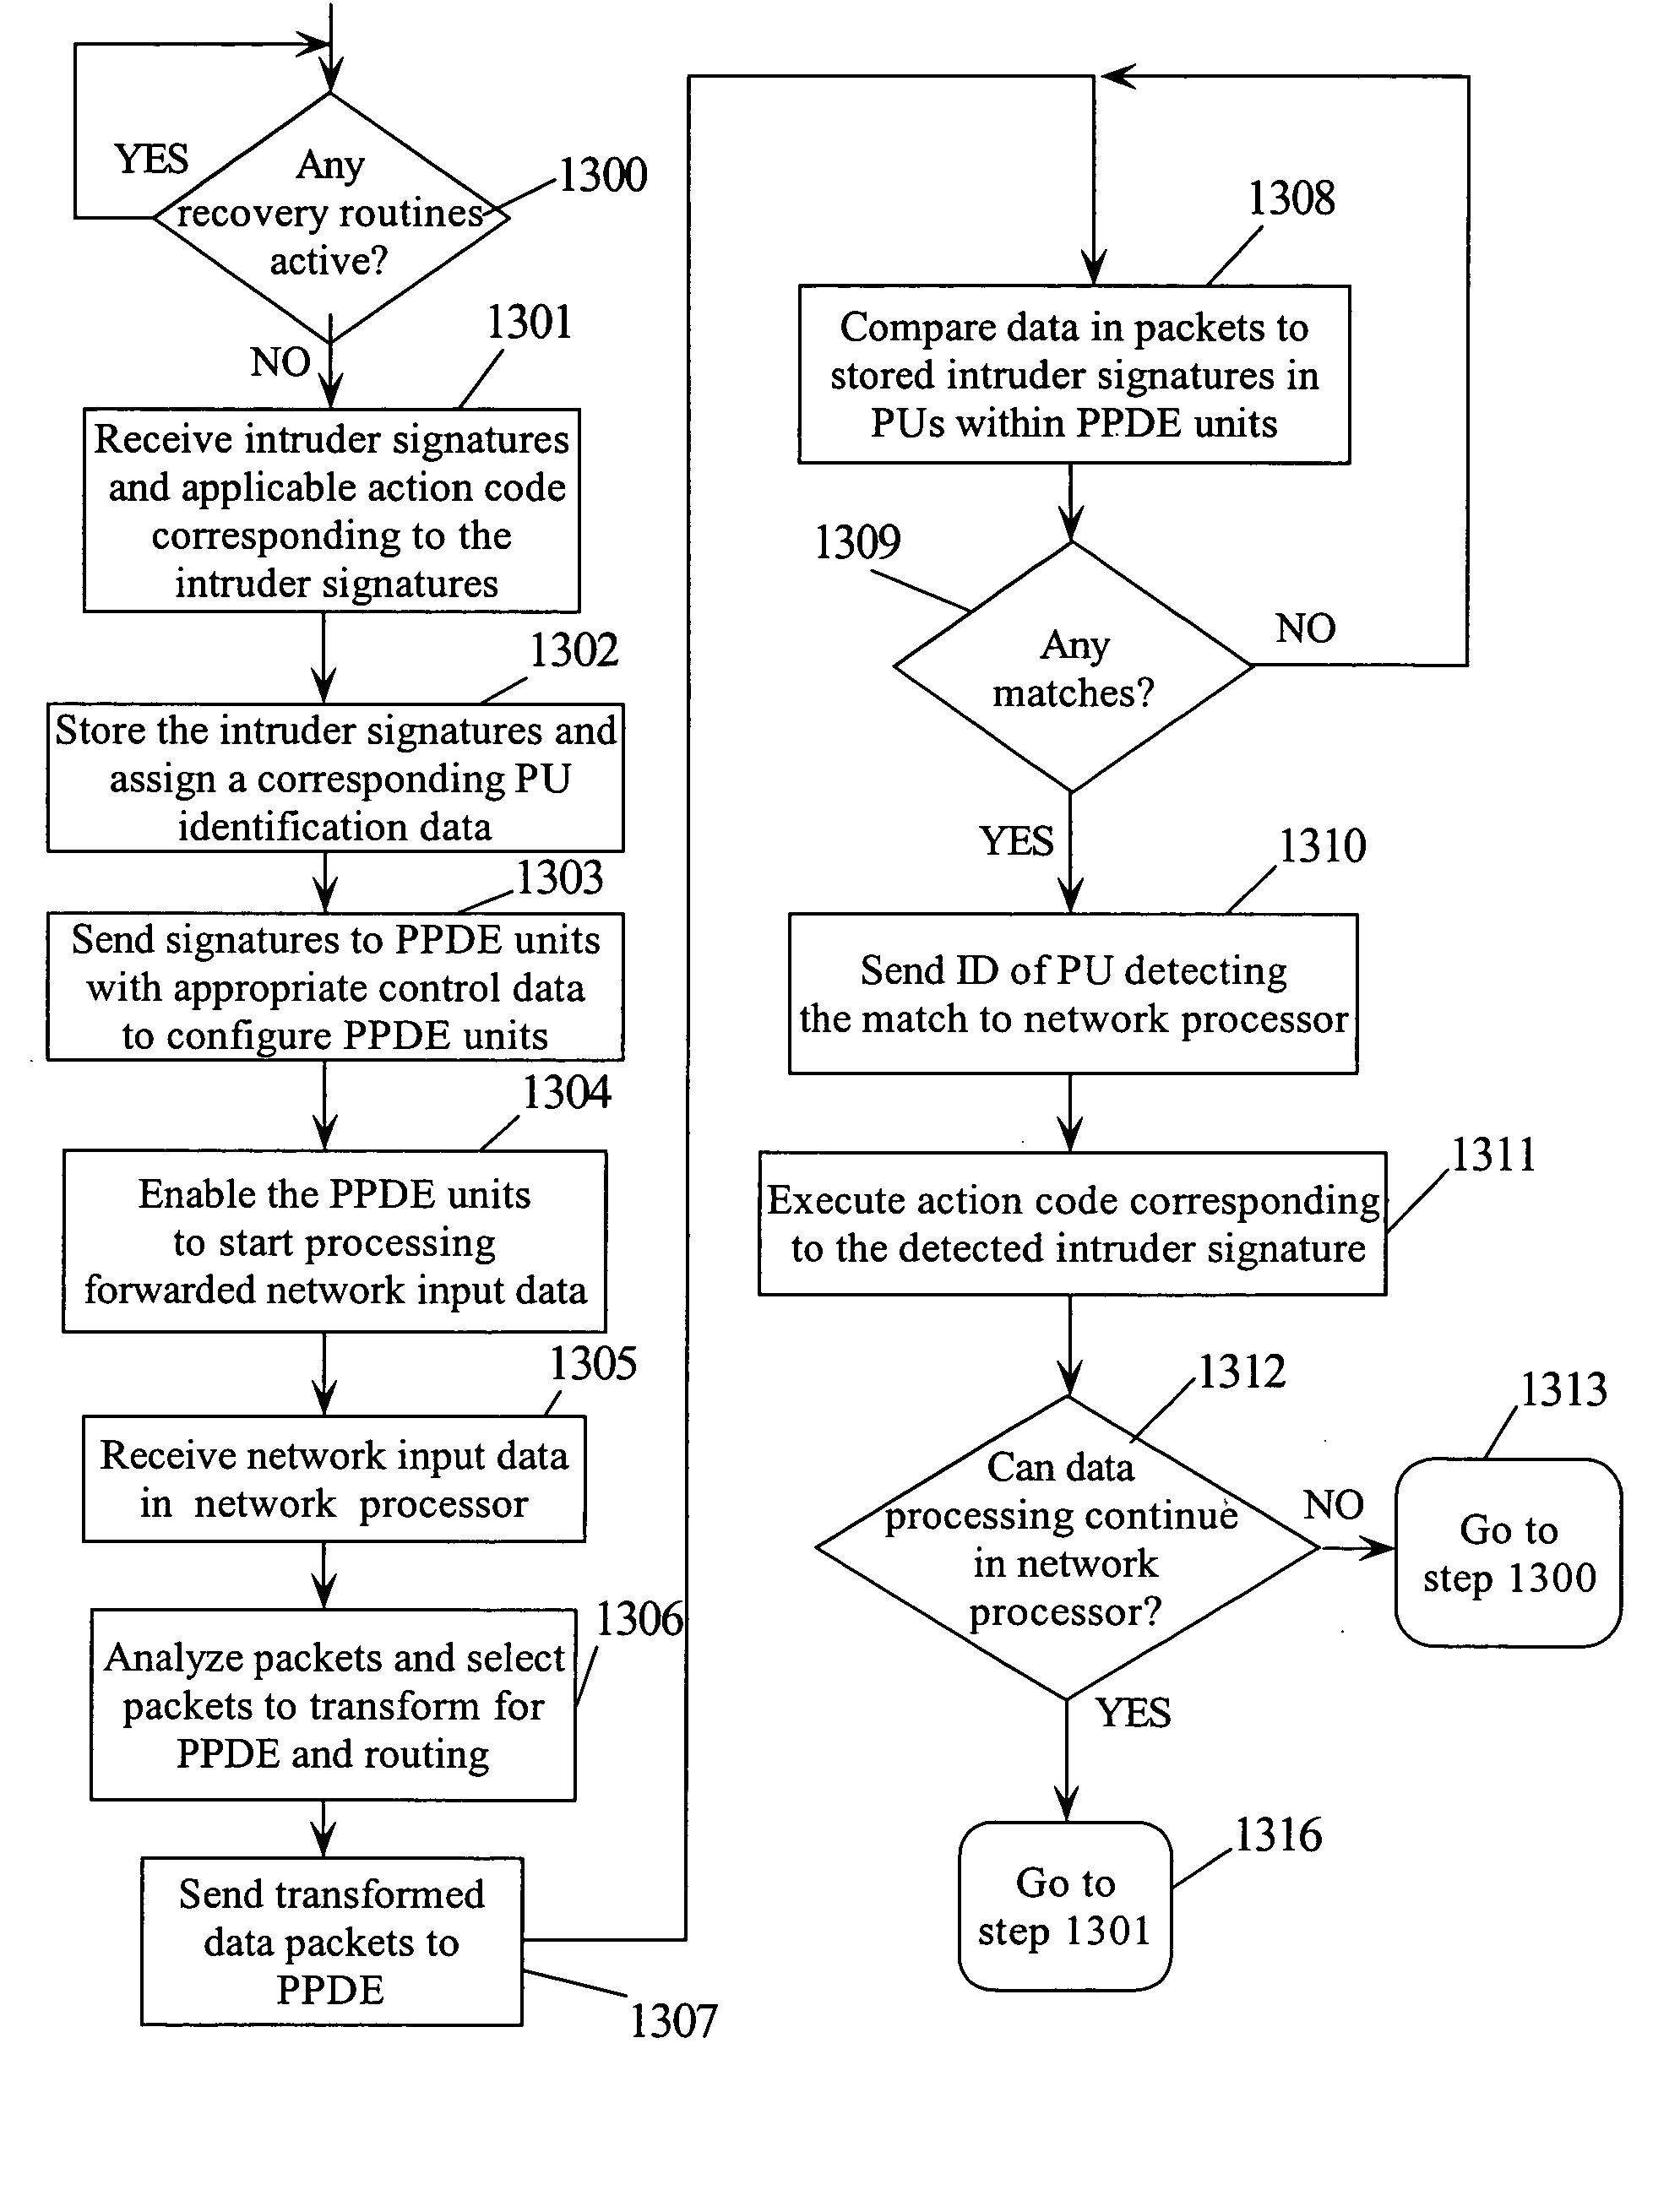 Intrusion detection using a network processor and a parallel pattern detection engine